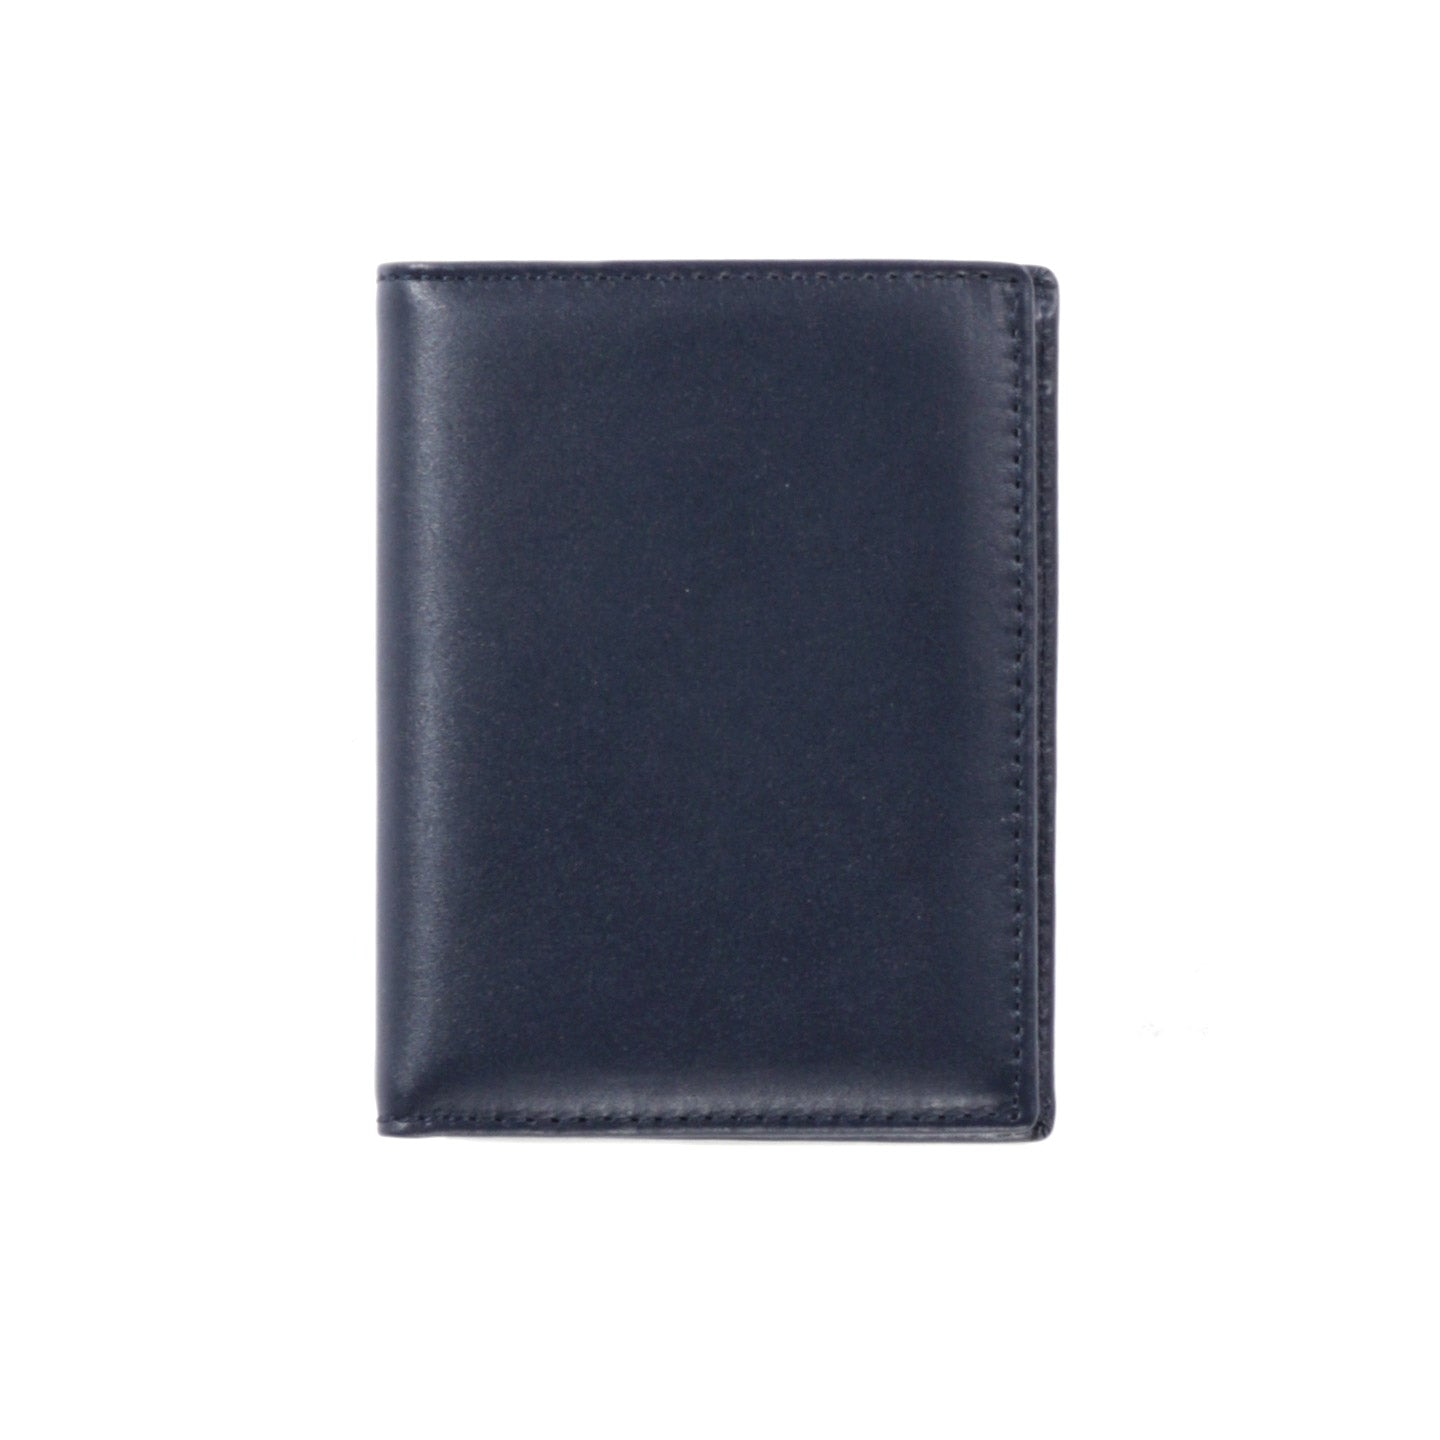 COMME DES GARCONS SA0641 CLASSIC LEATHER WALLET NAVY